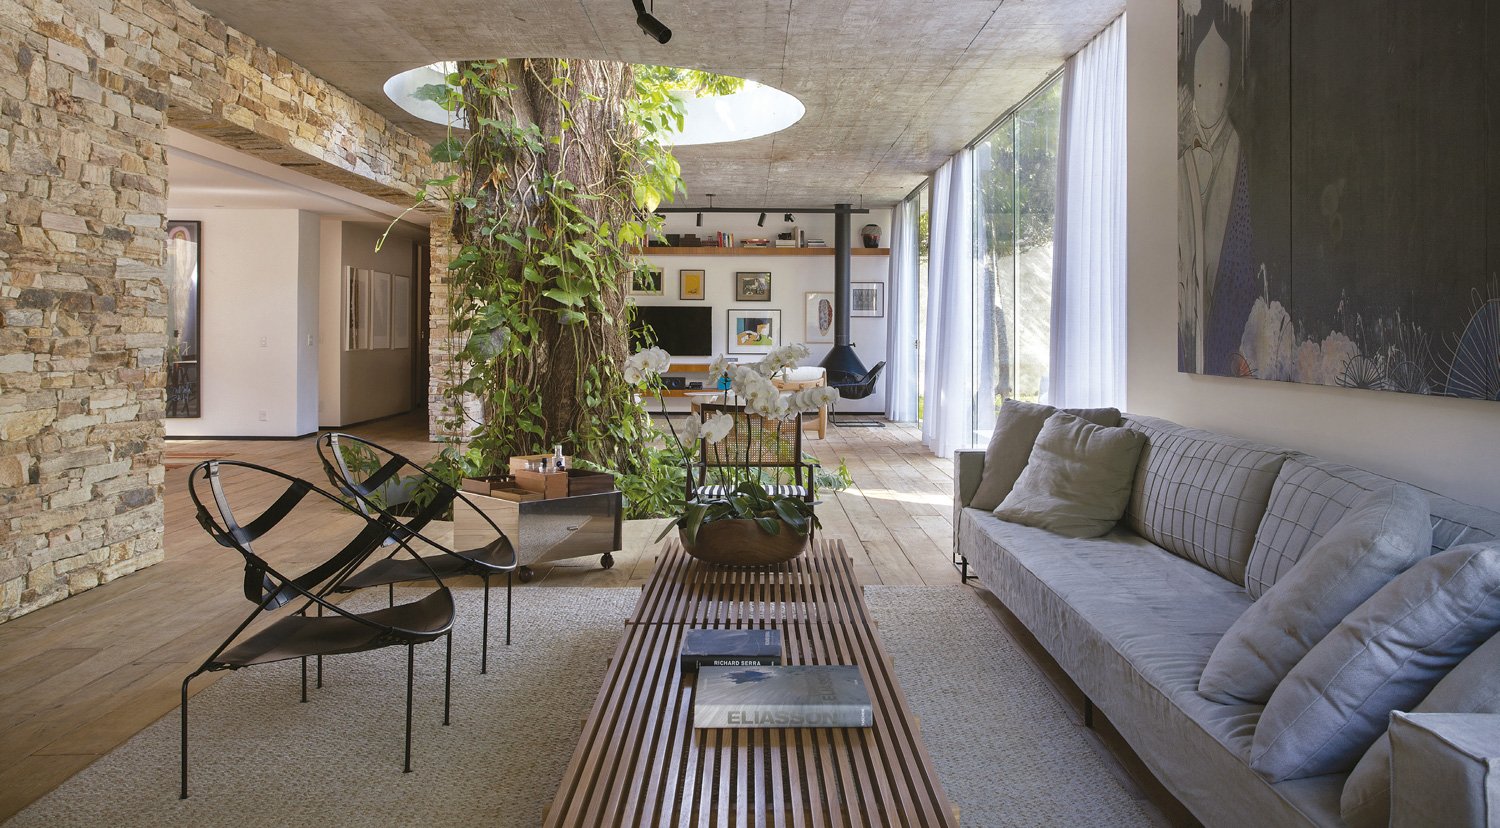 17 Biophilic Design Ideas Showcase Ways to Connect with Nature